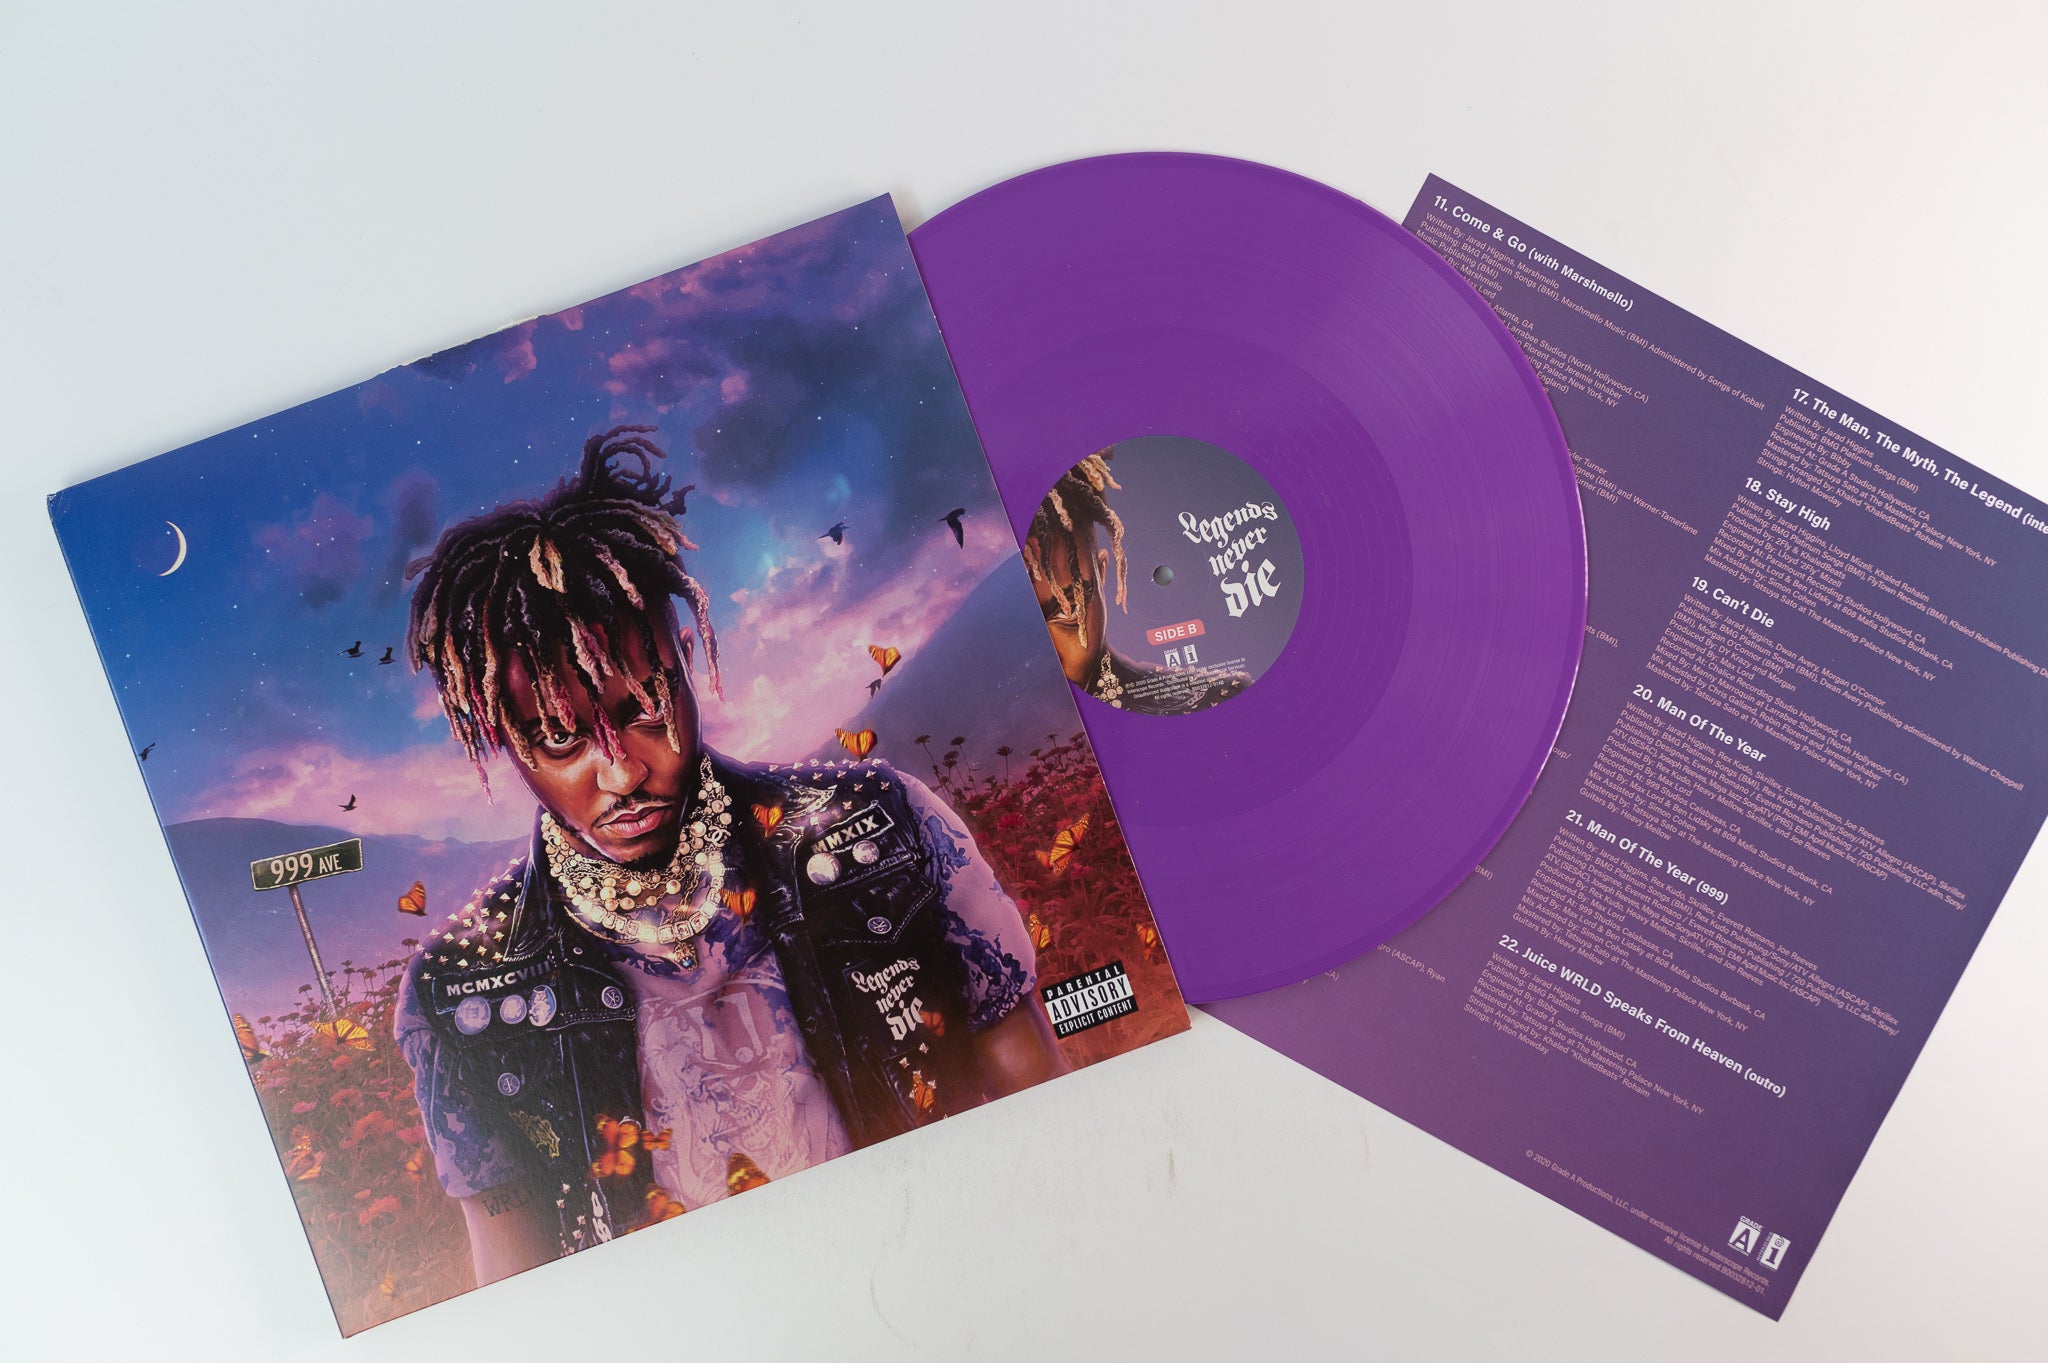 RapCaviar on X: Juice WRLD's Legends Never Die turns 1 today 🦋 What's  your favorite song from the album?  / X